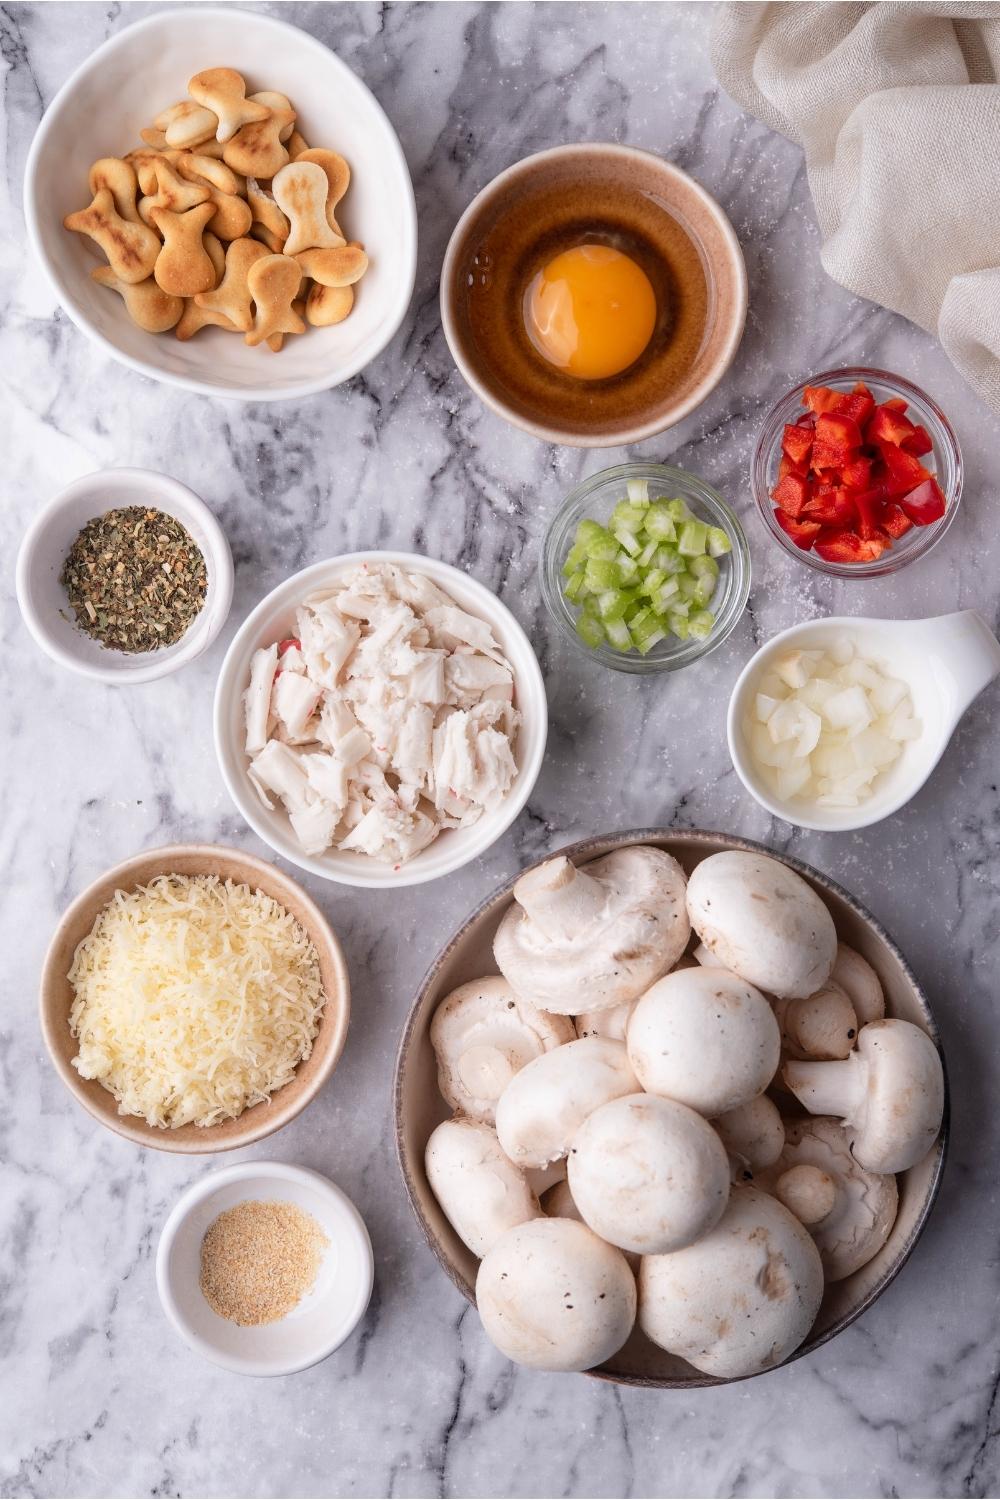 An assortment of ingredients for stuffed mushrooms including bowls of crackers, mushrooms, egg, cheese, vegetables, and spices.